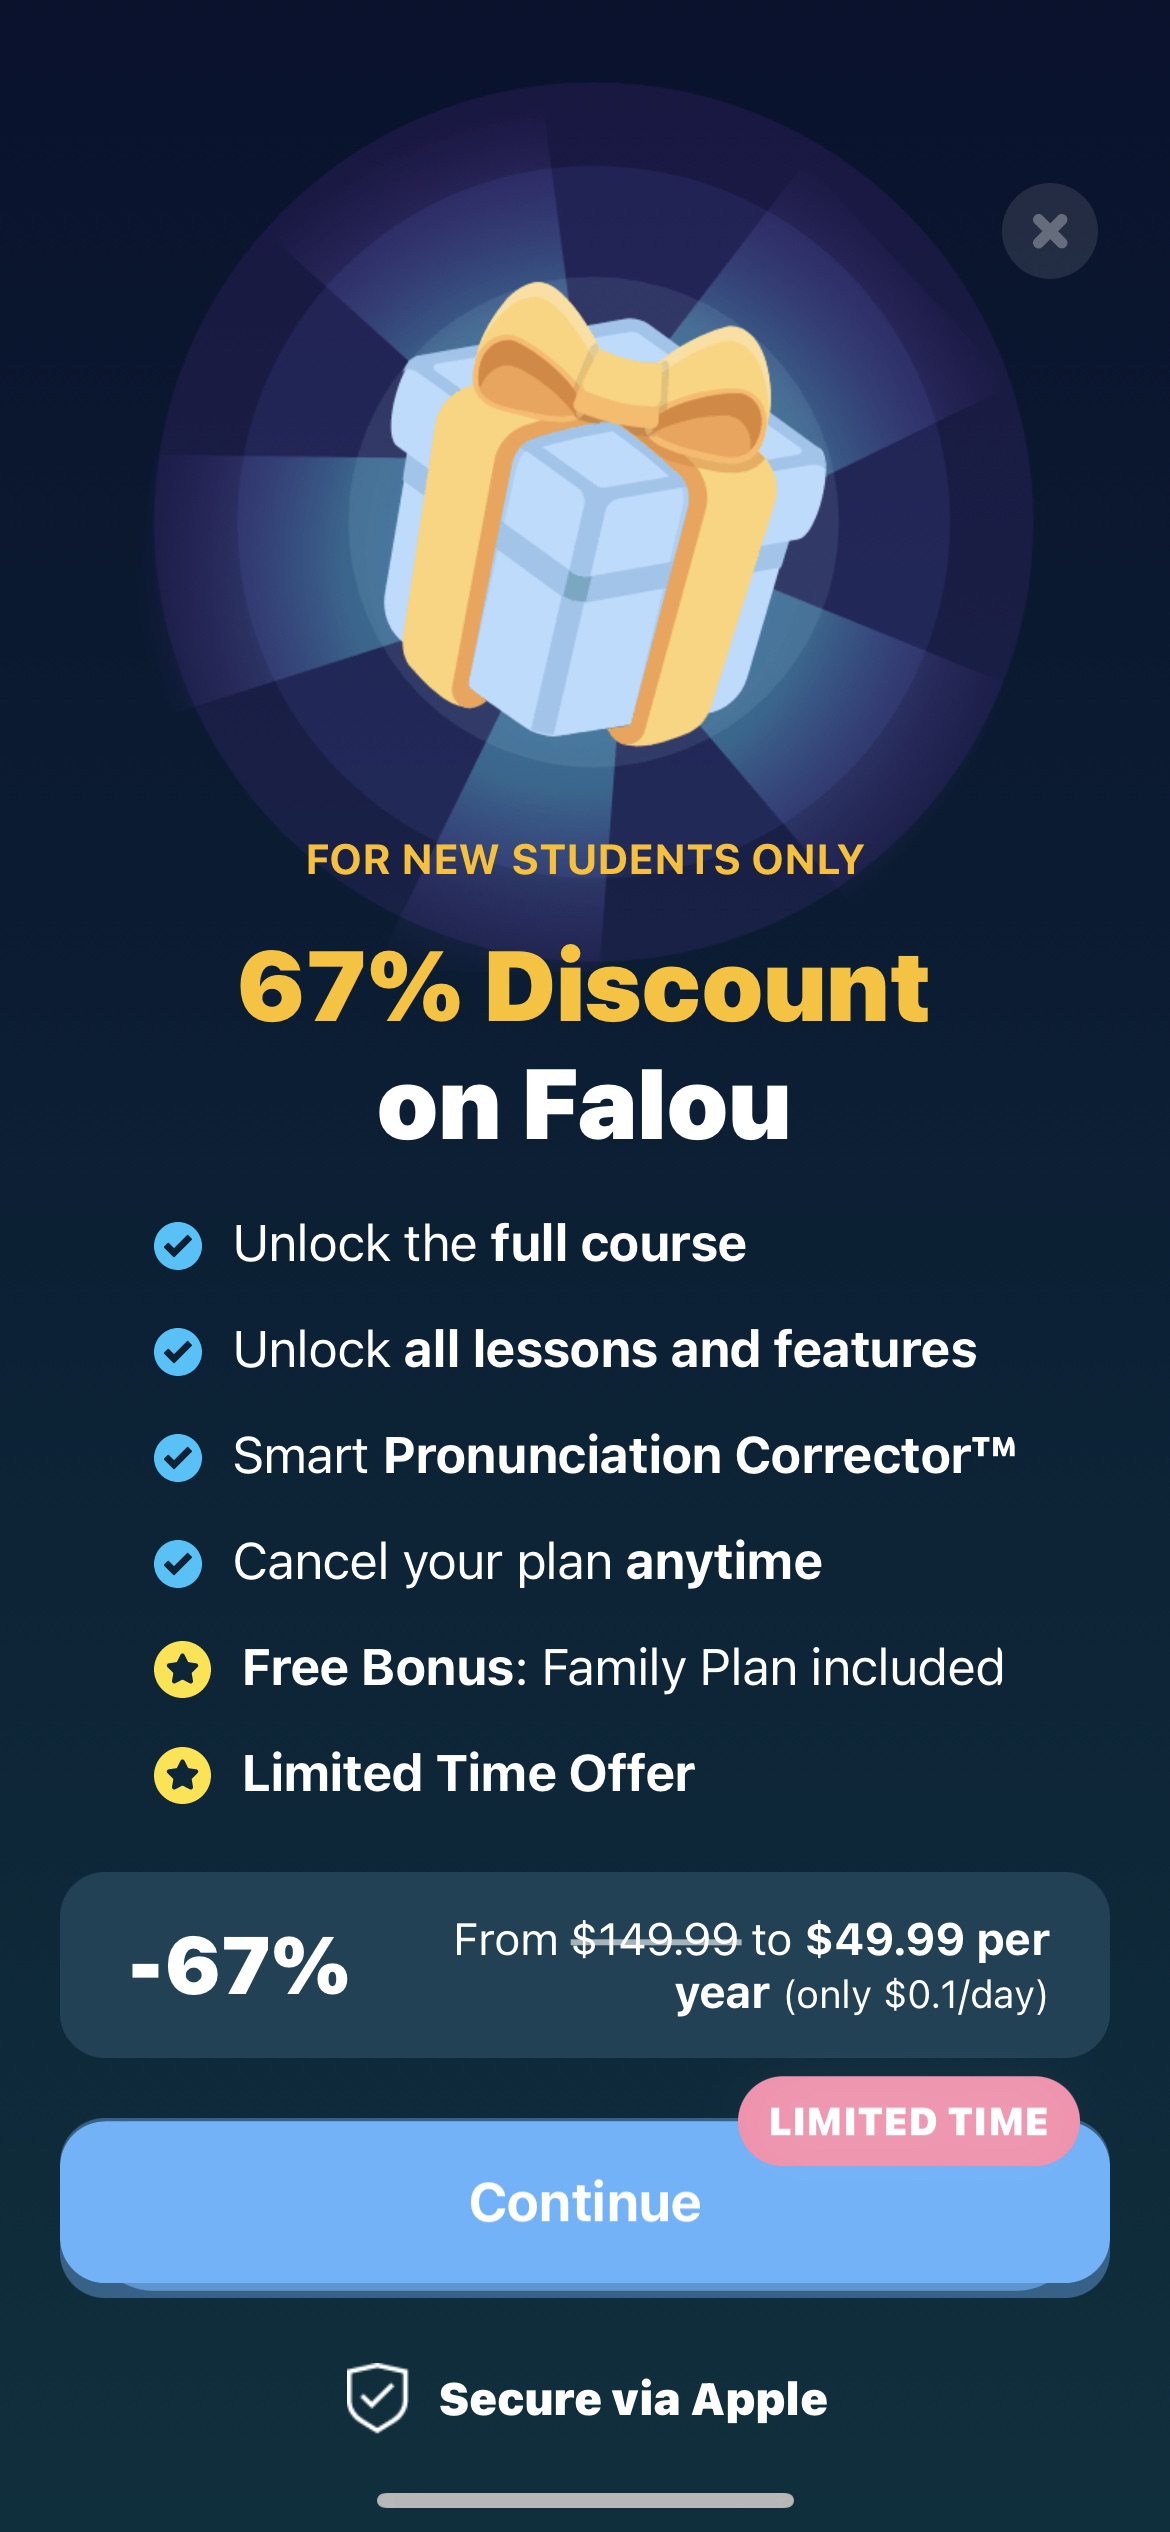 Falou - Fast language learning mobile app special offer paywall